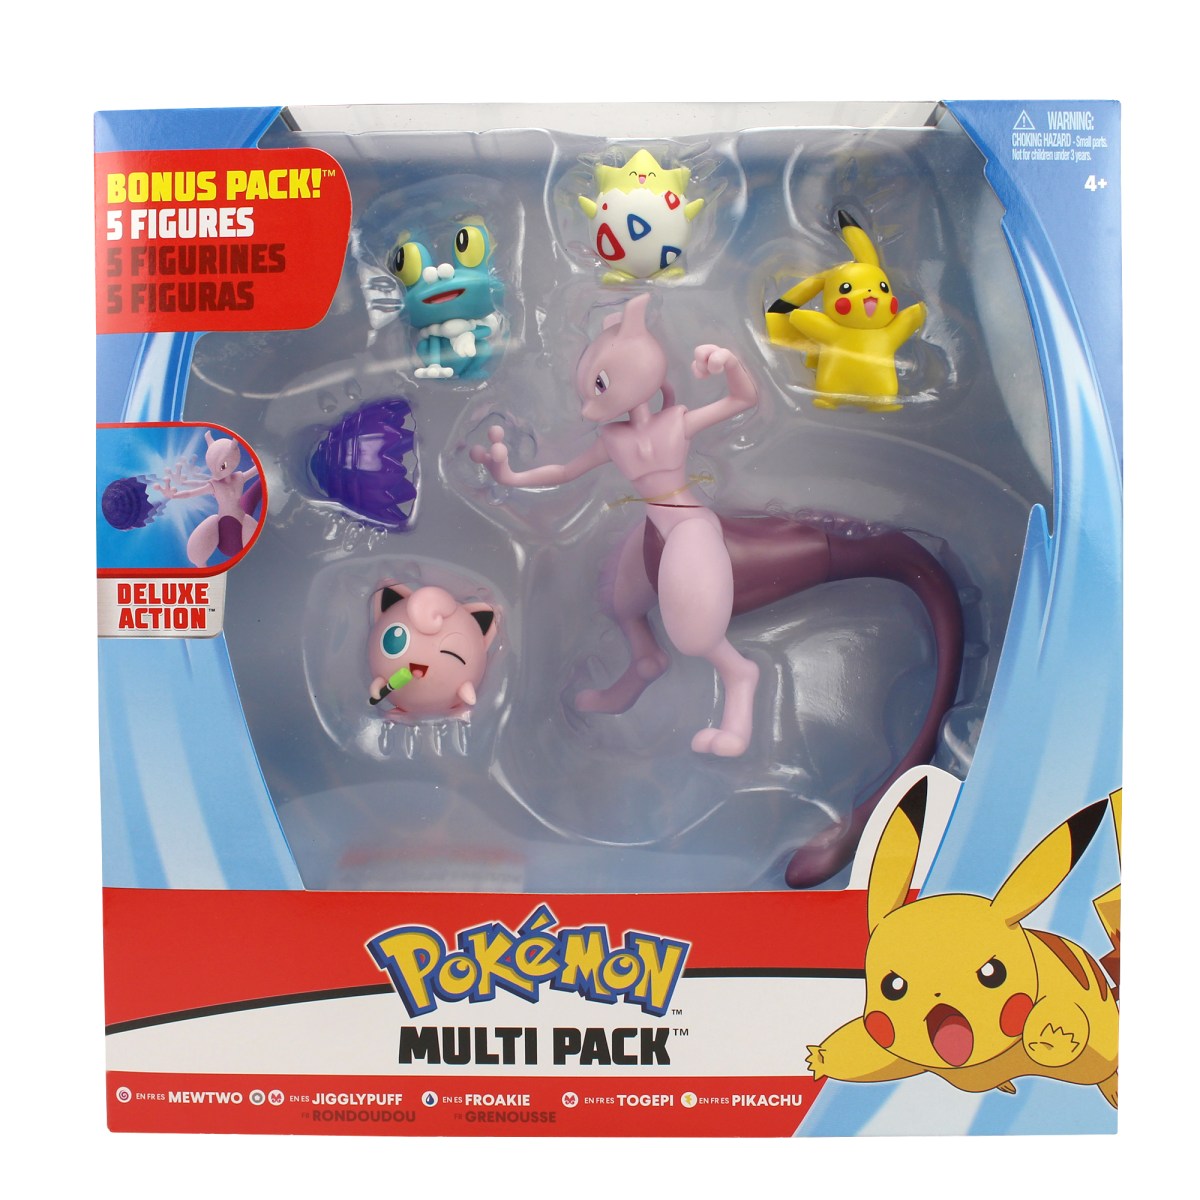 Another Pokemon Battle Pack